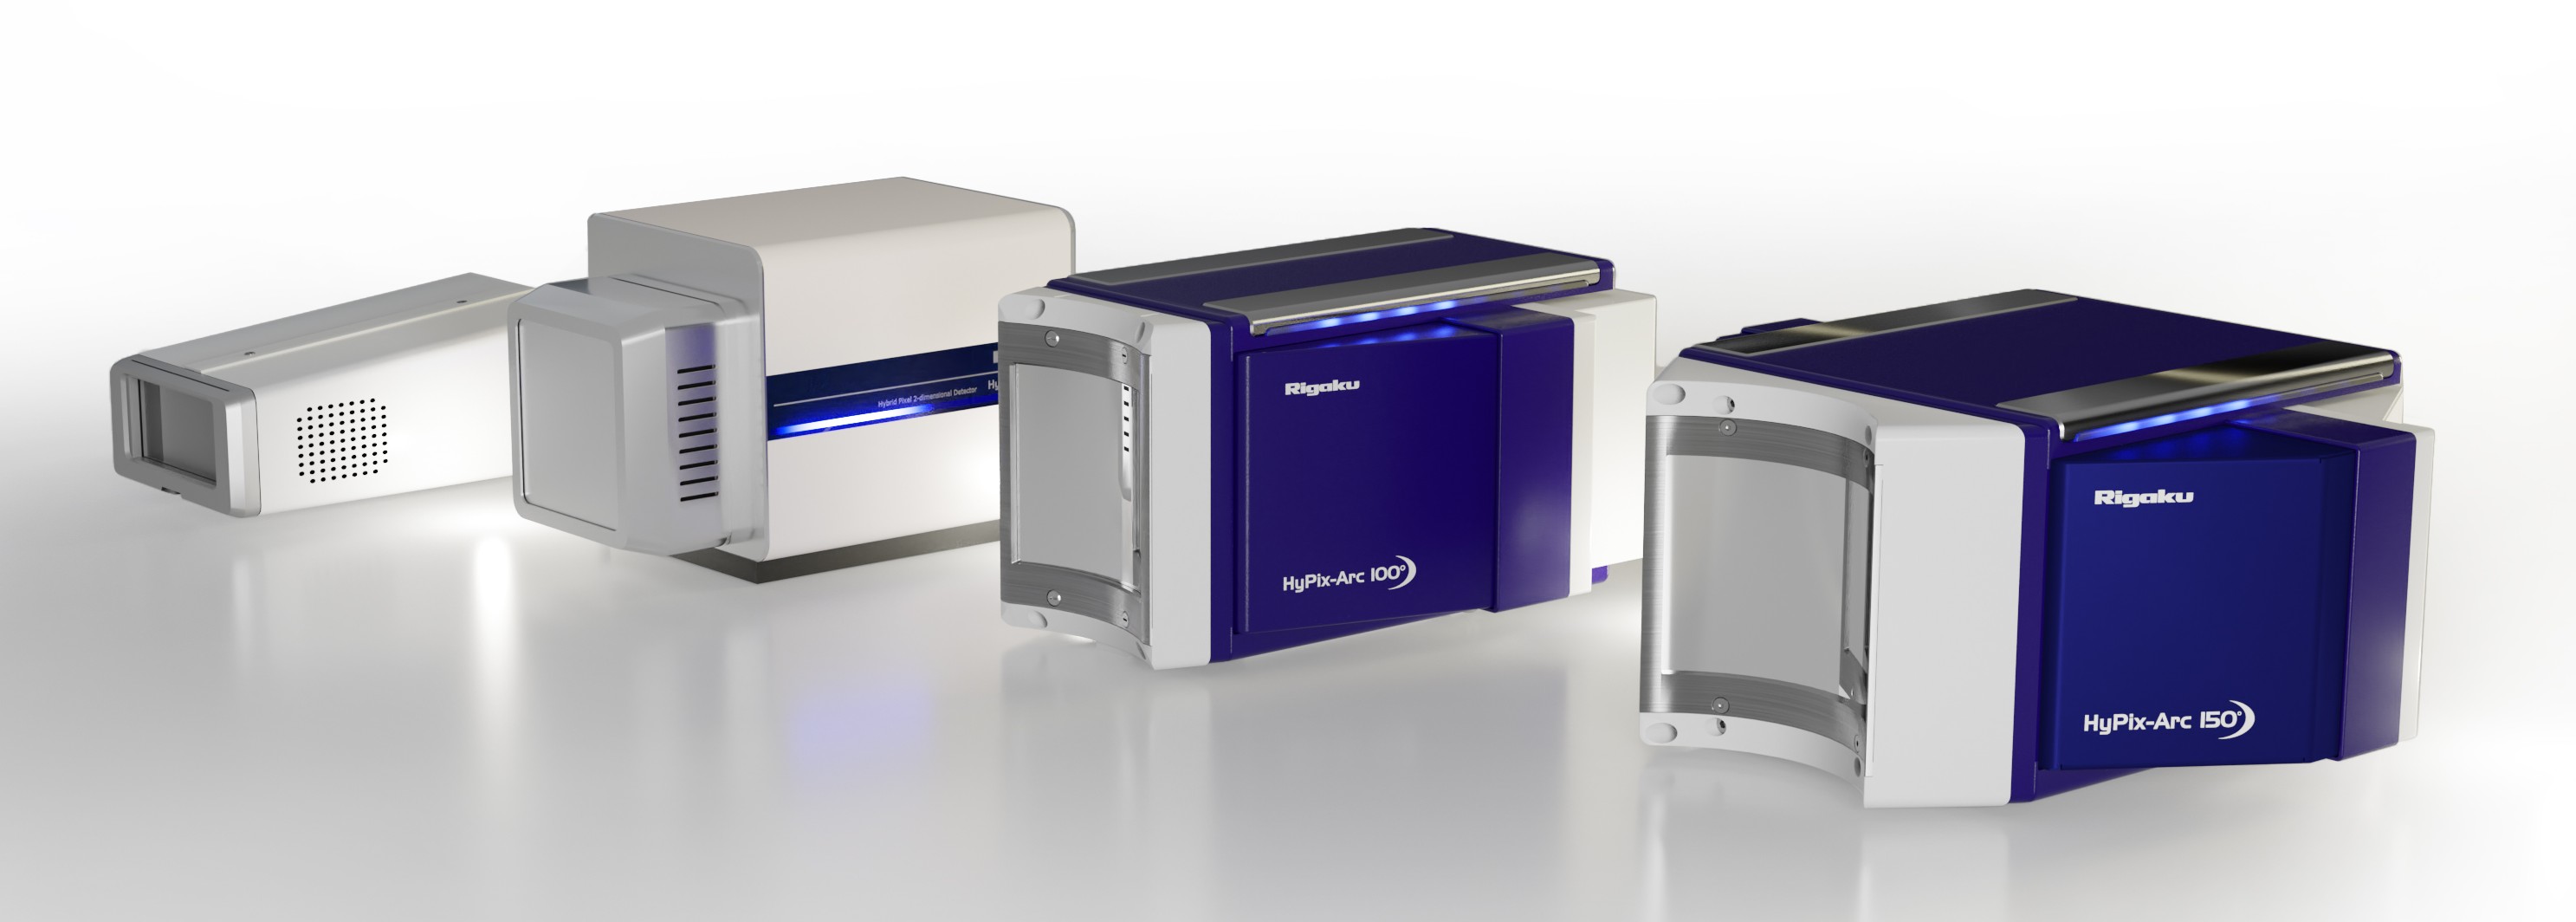 Rigaku’s Family of HyPix Direct X-ray Detection Detectors